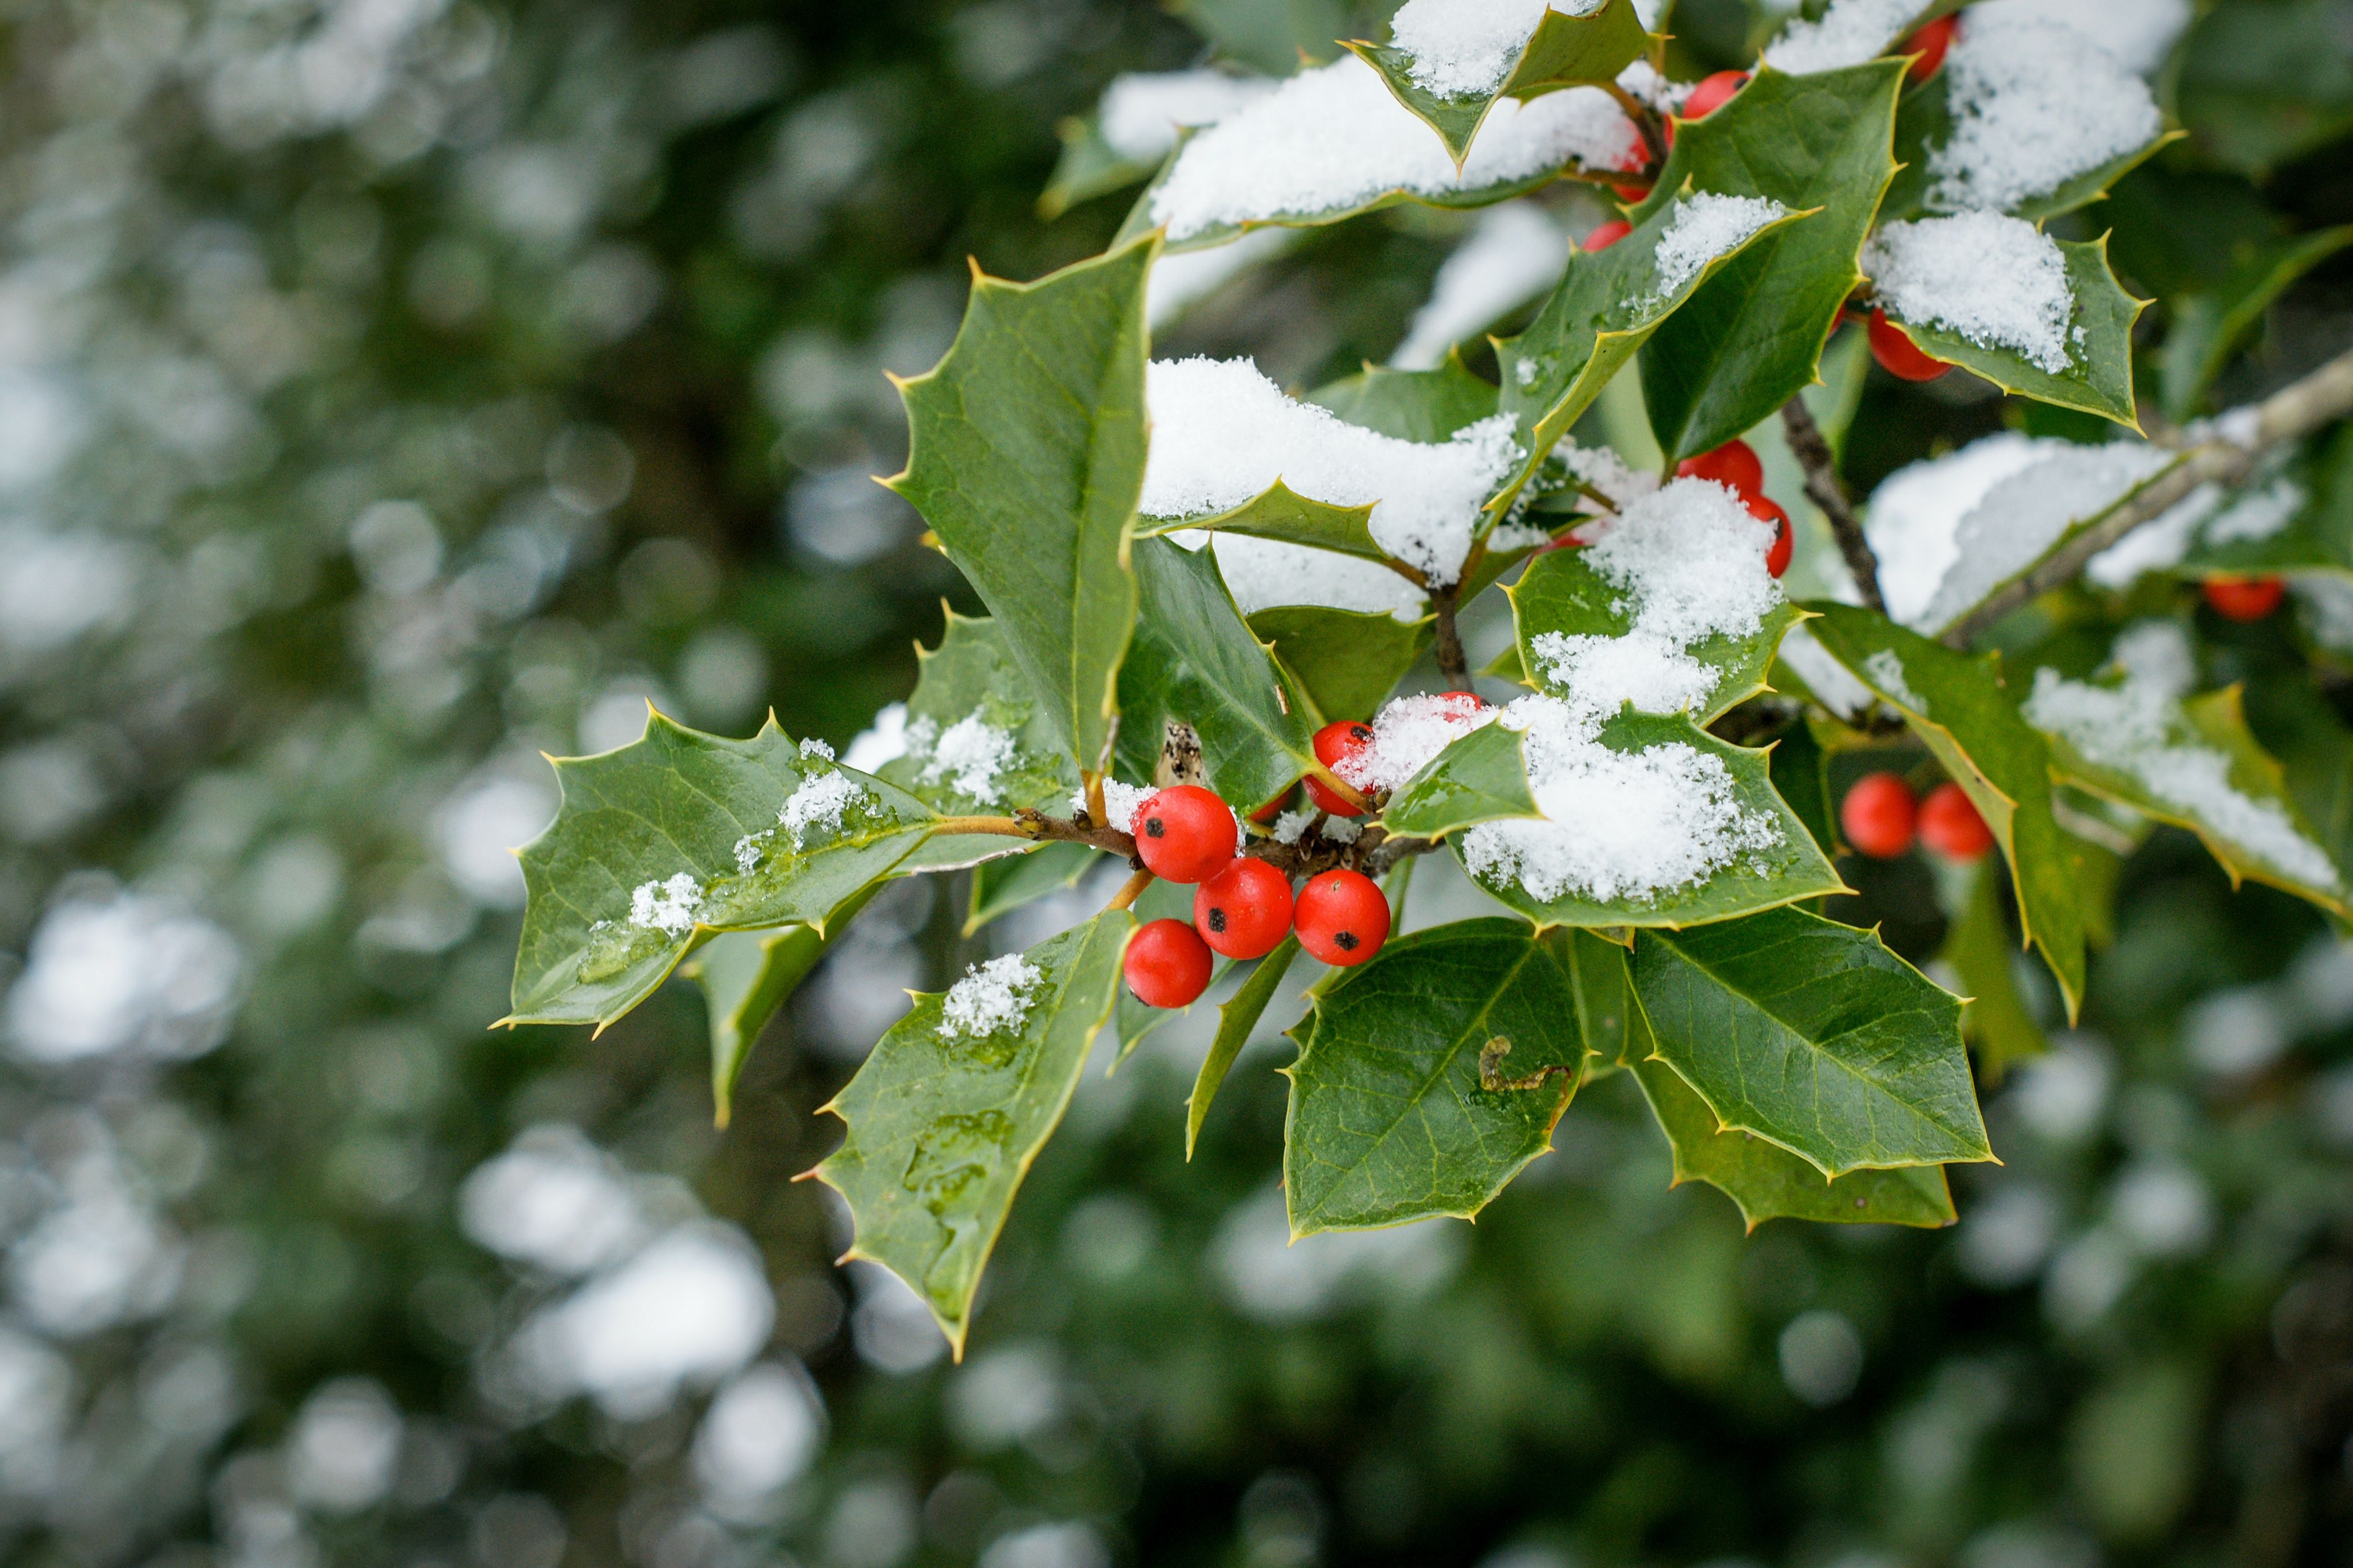 are red holly berries poisonous to dogs